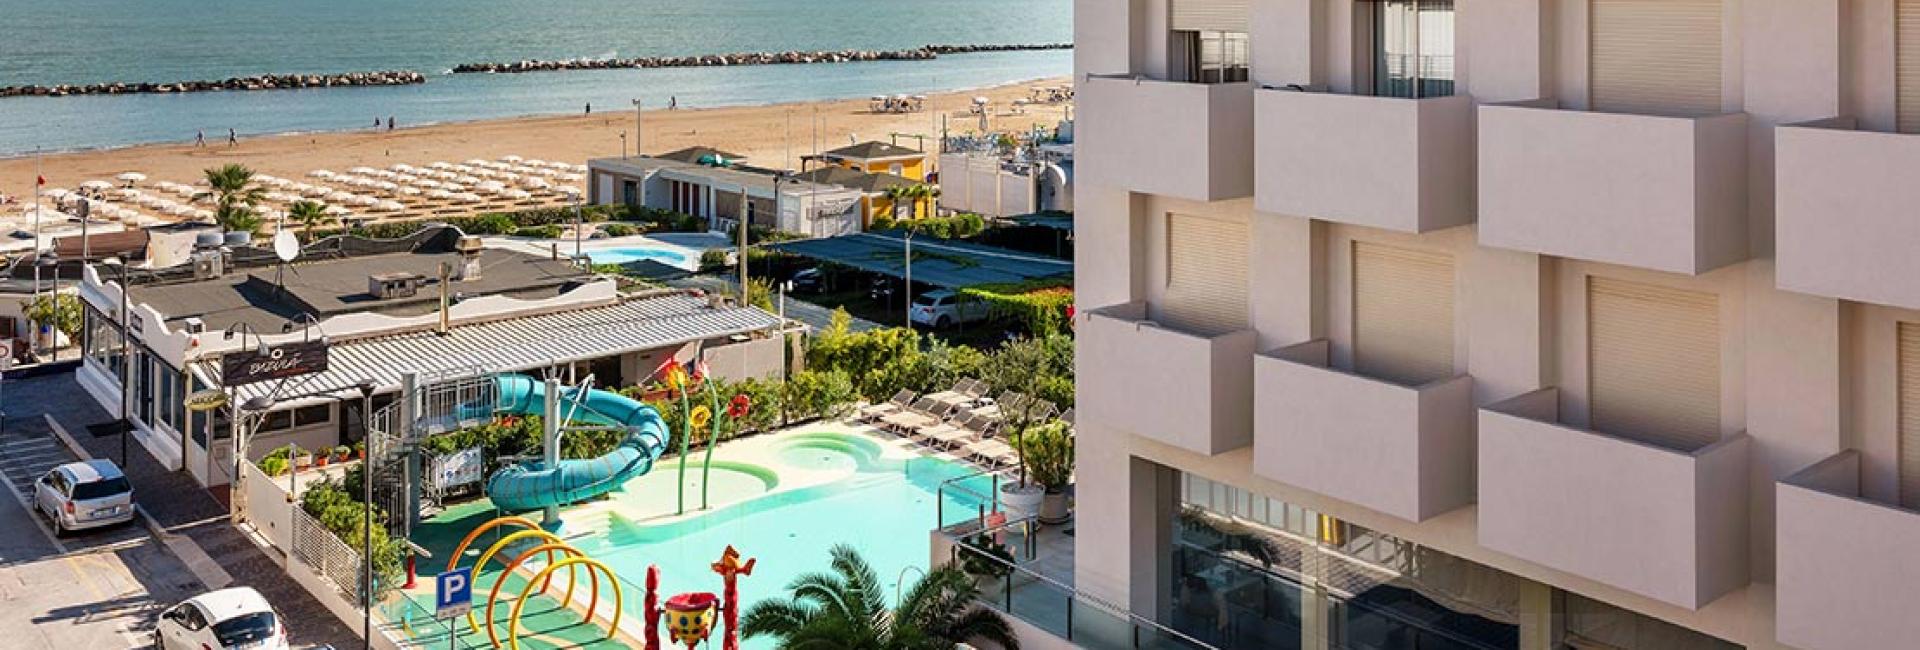 cattolicafamilyresort en july-in-cattolica-at-family-hotel-with-pool-and-entertainment 011